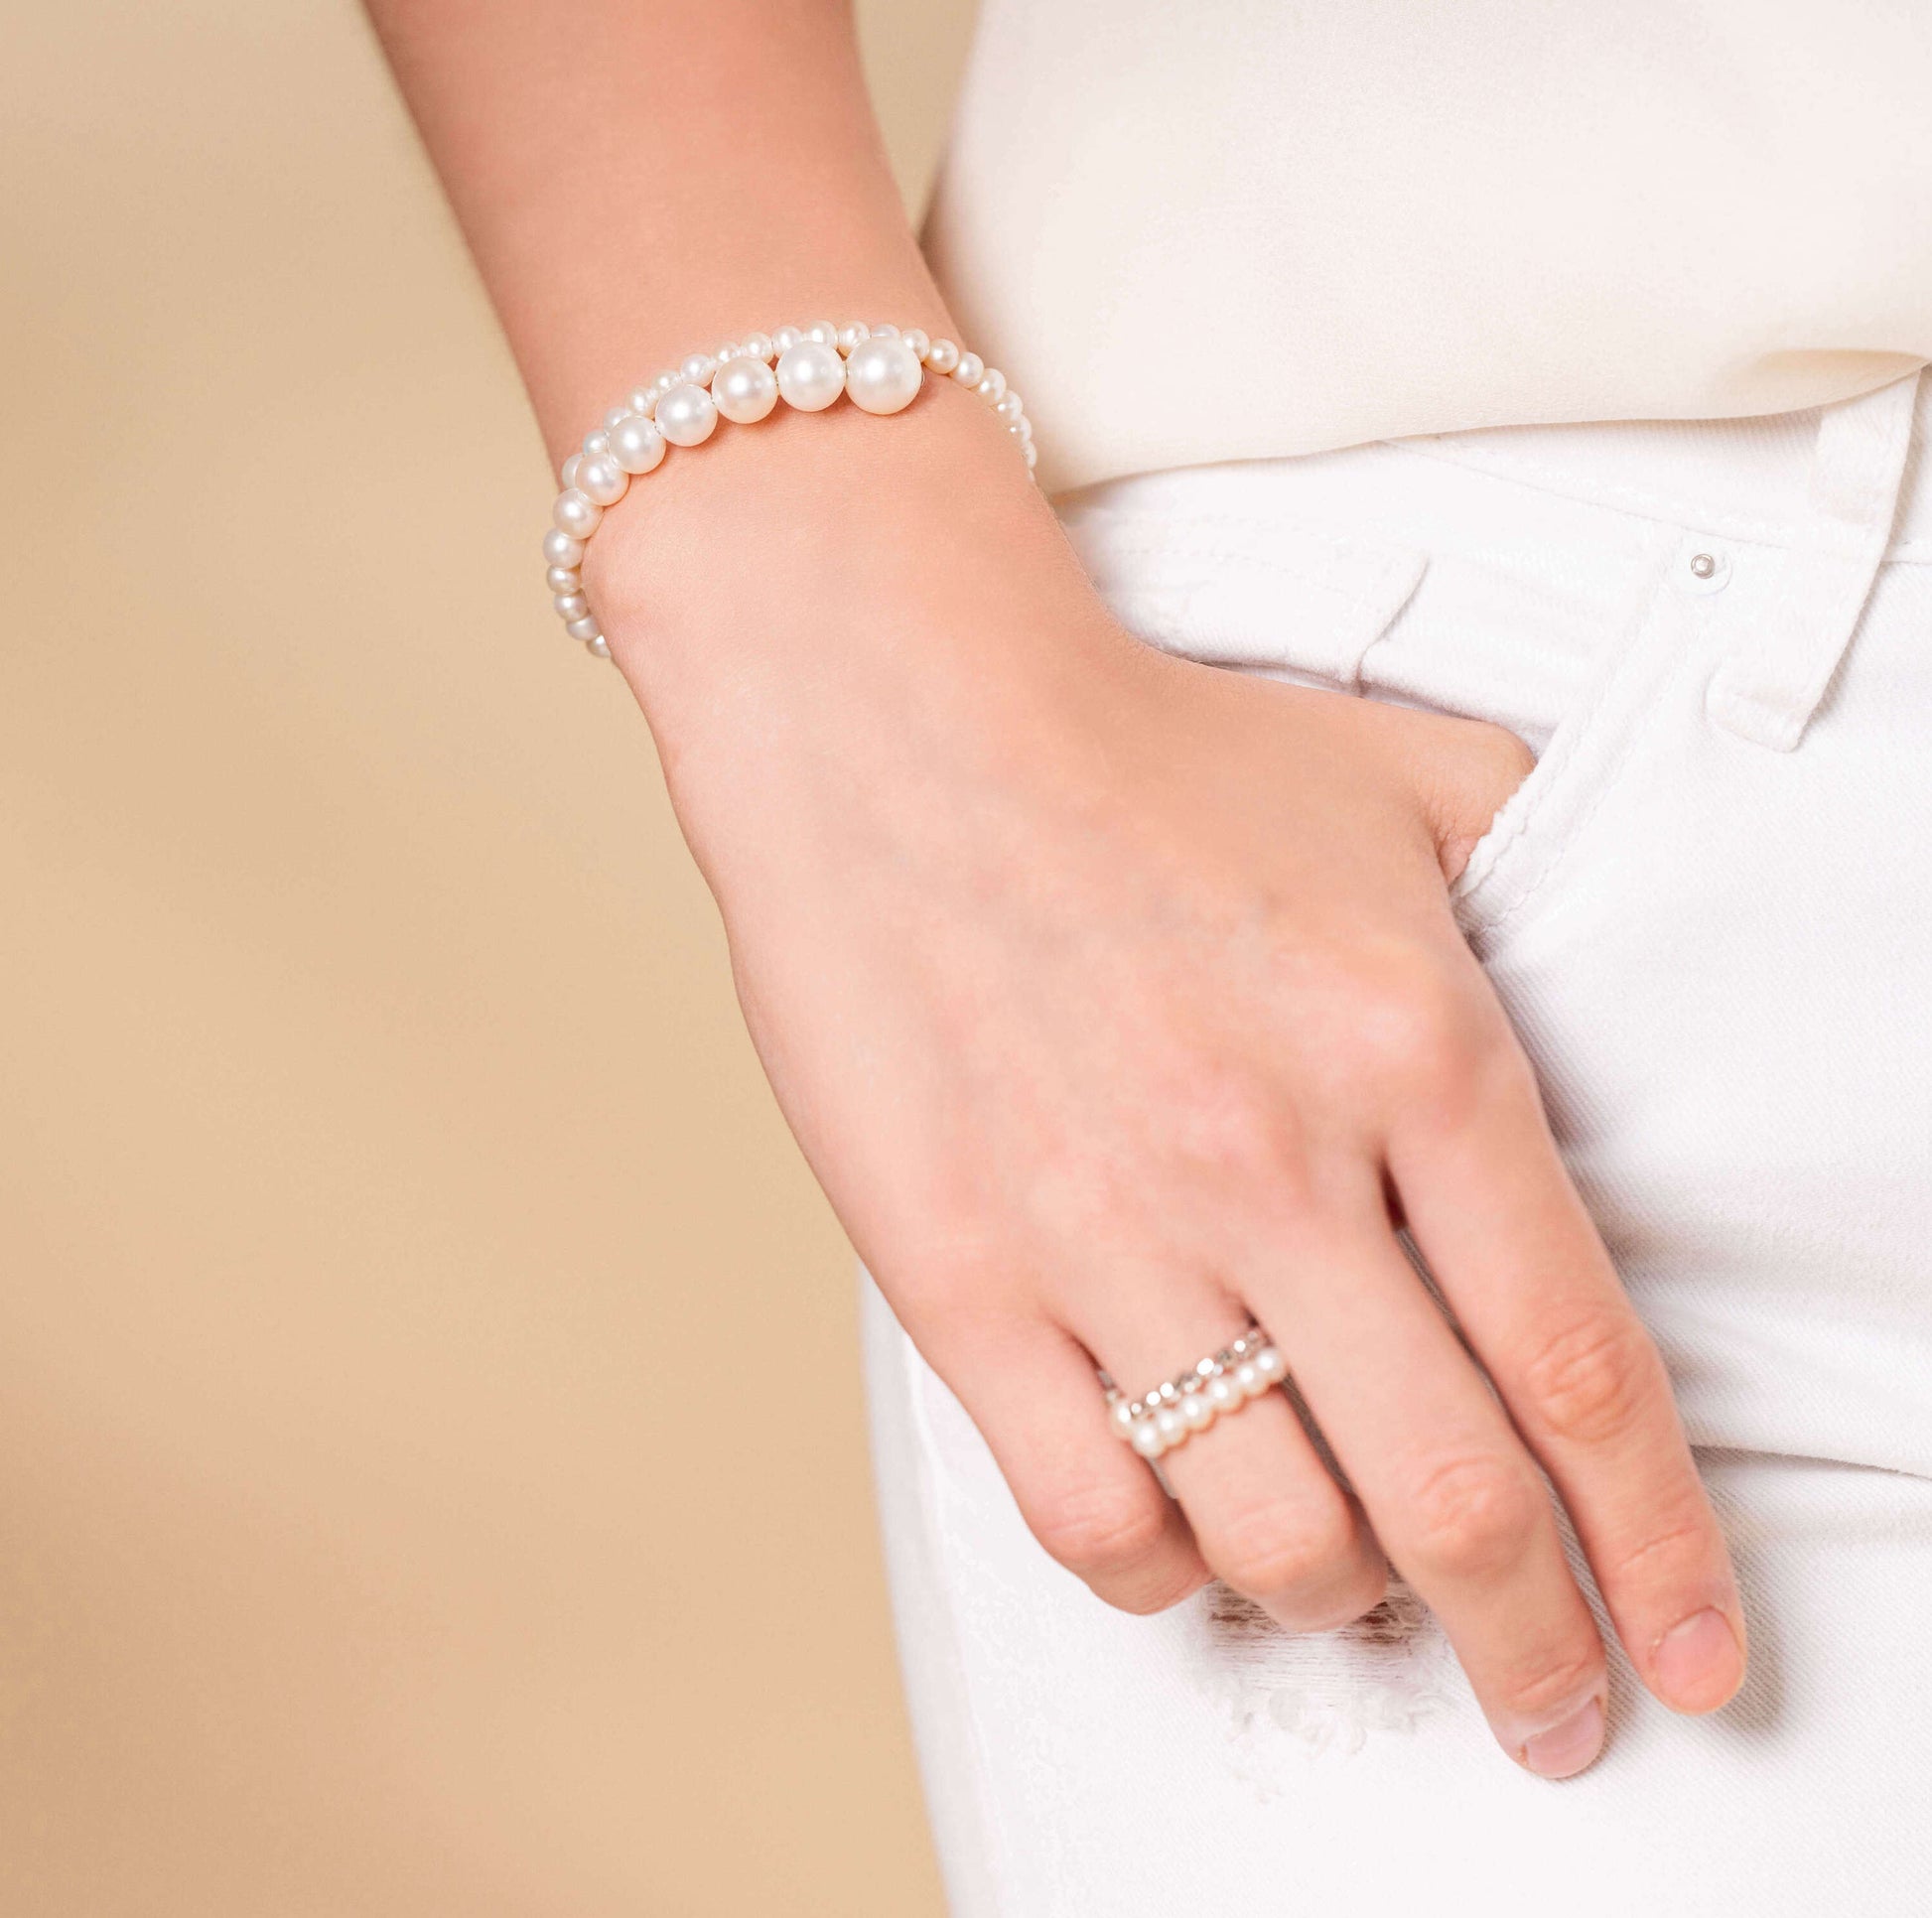 Stylish woman in white jeans accessorized with a chic Spiral Pearl Bracelet.